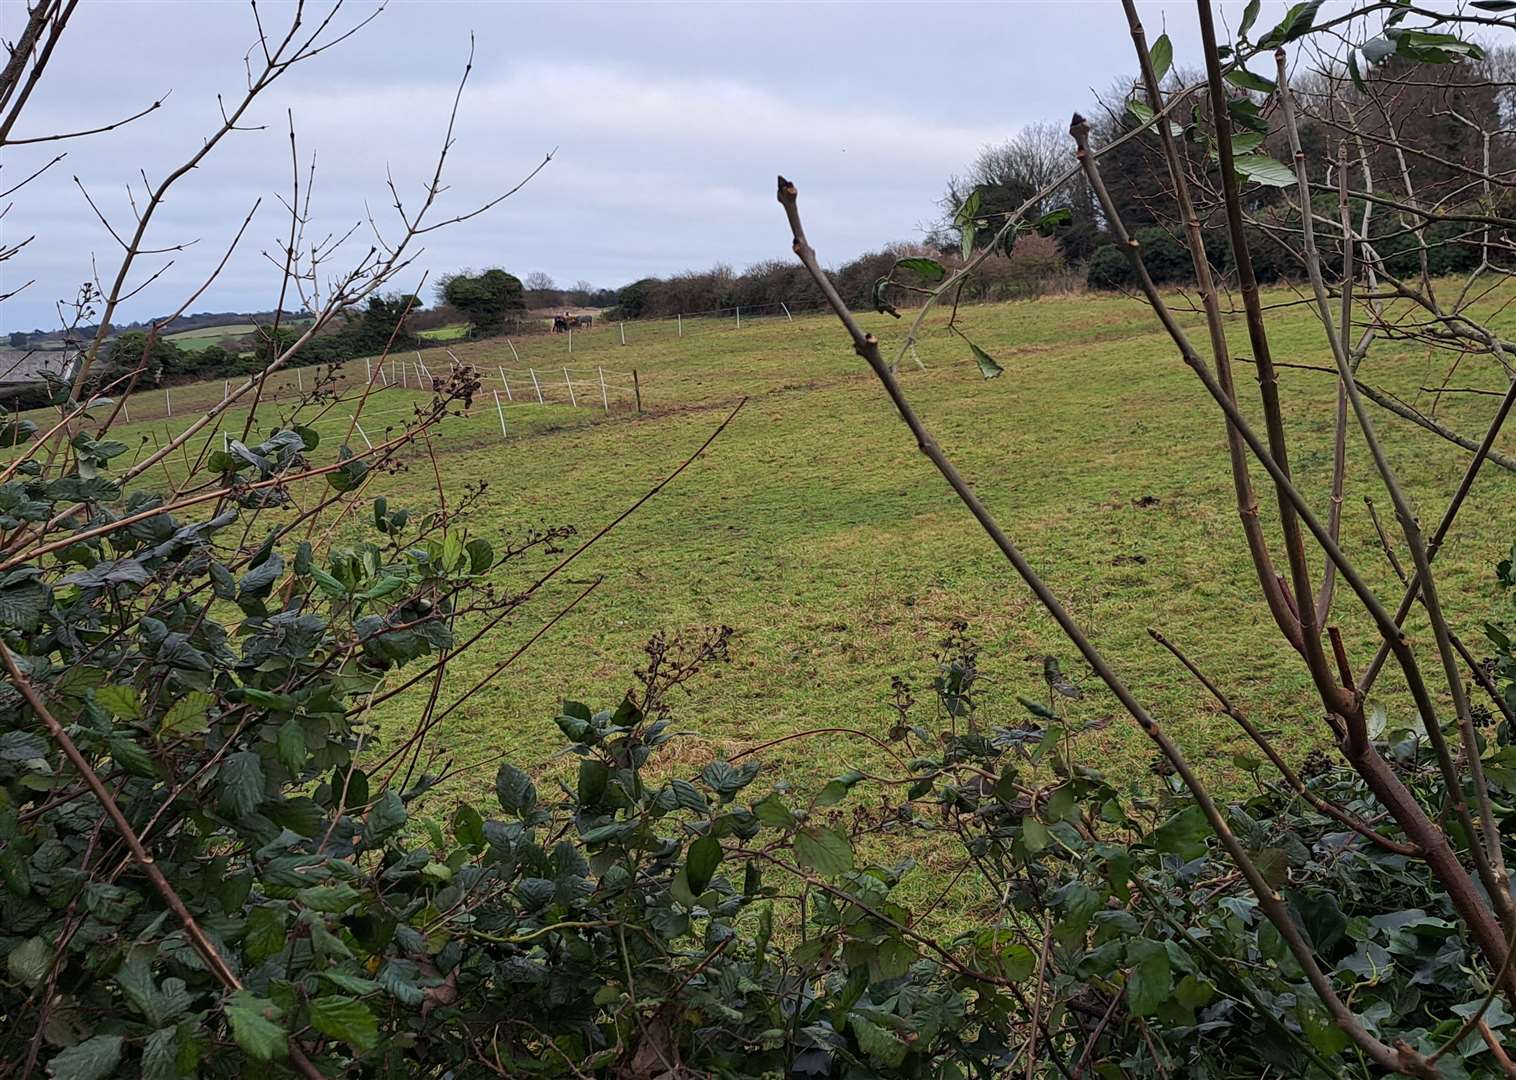 The horse field at St Margaret's-at-Cliffe where the 15 homes are planned